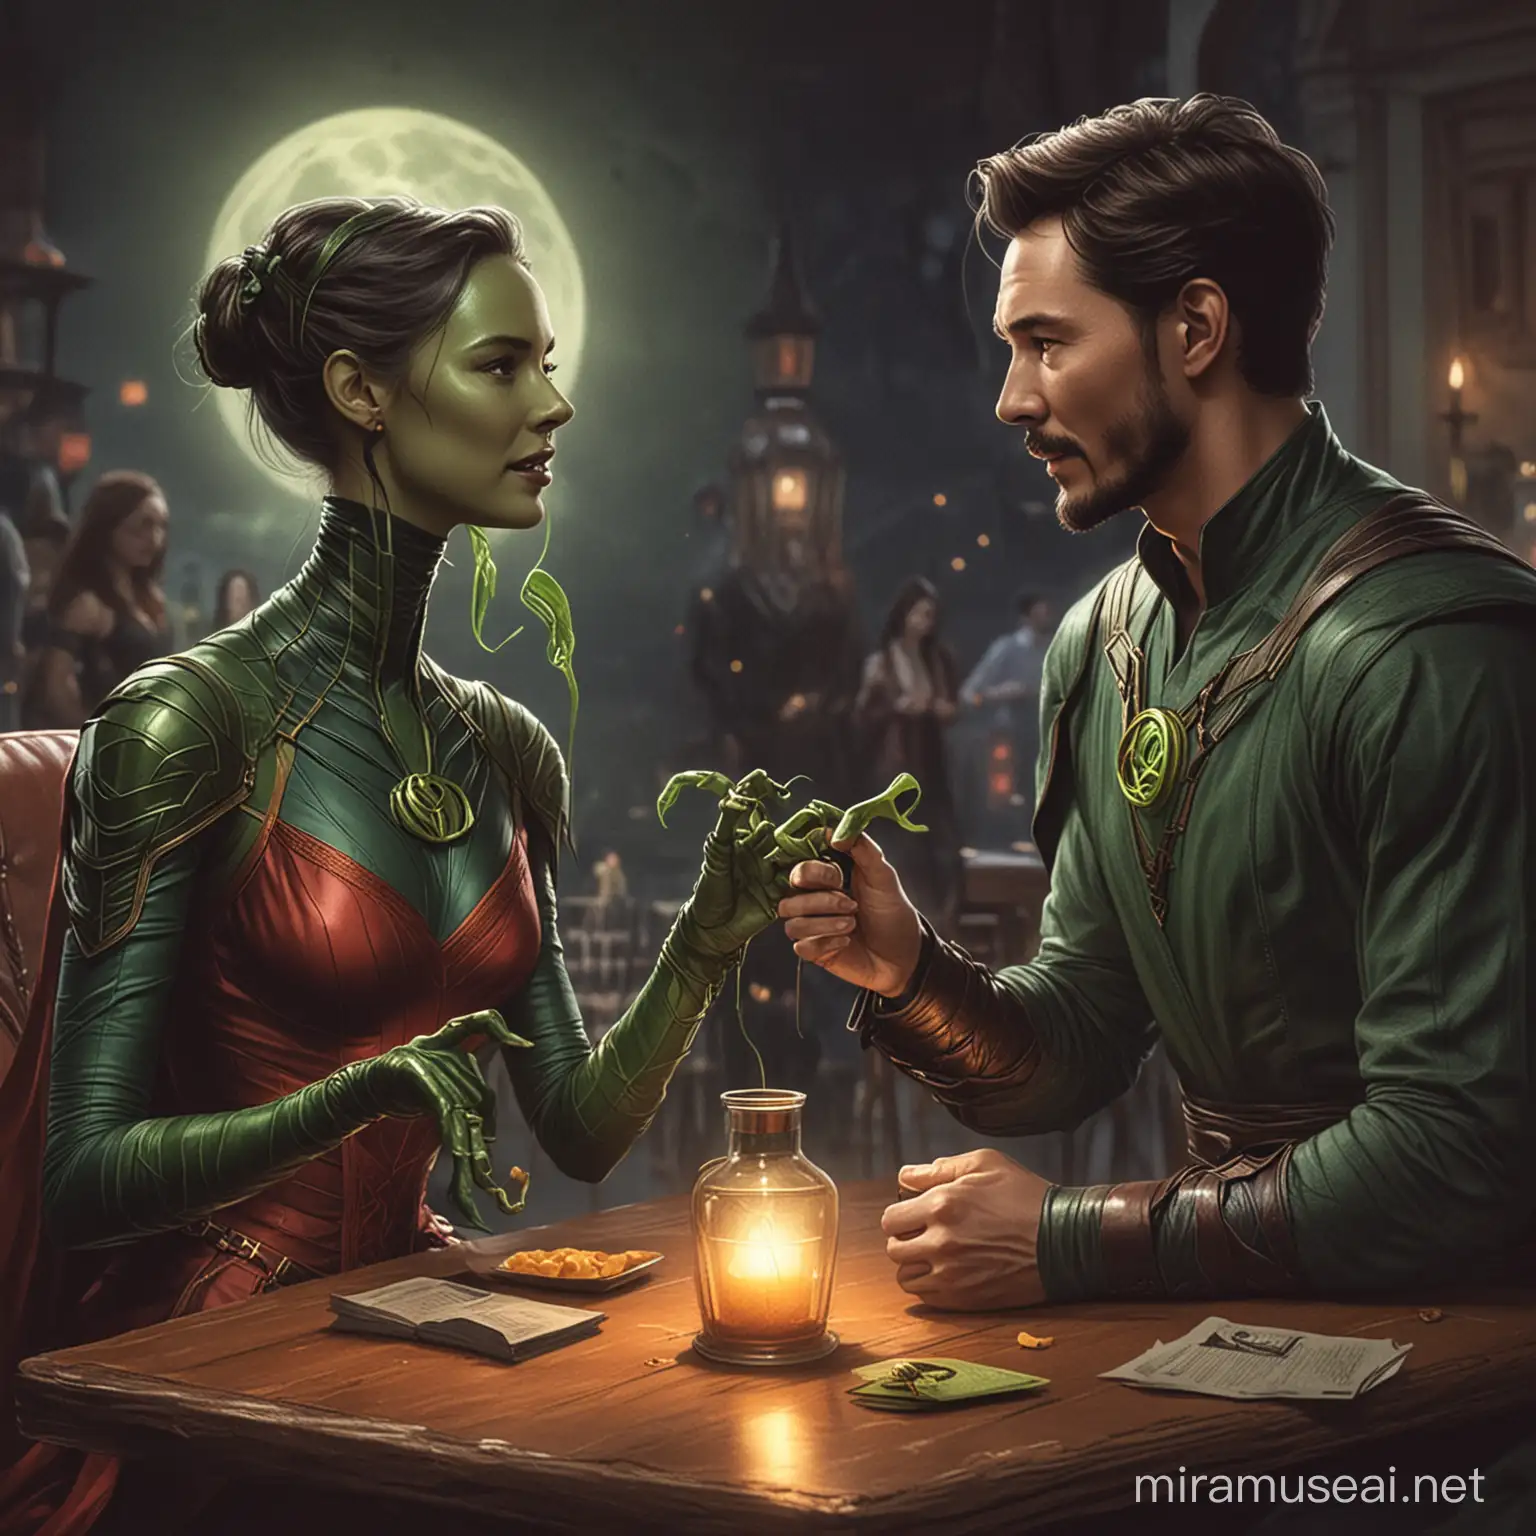 give an illustartion of the speed dating in halloween costumes, the man has dr strange costume and the girl has mantis' costume
